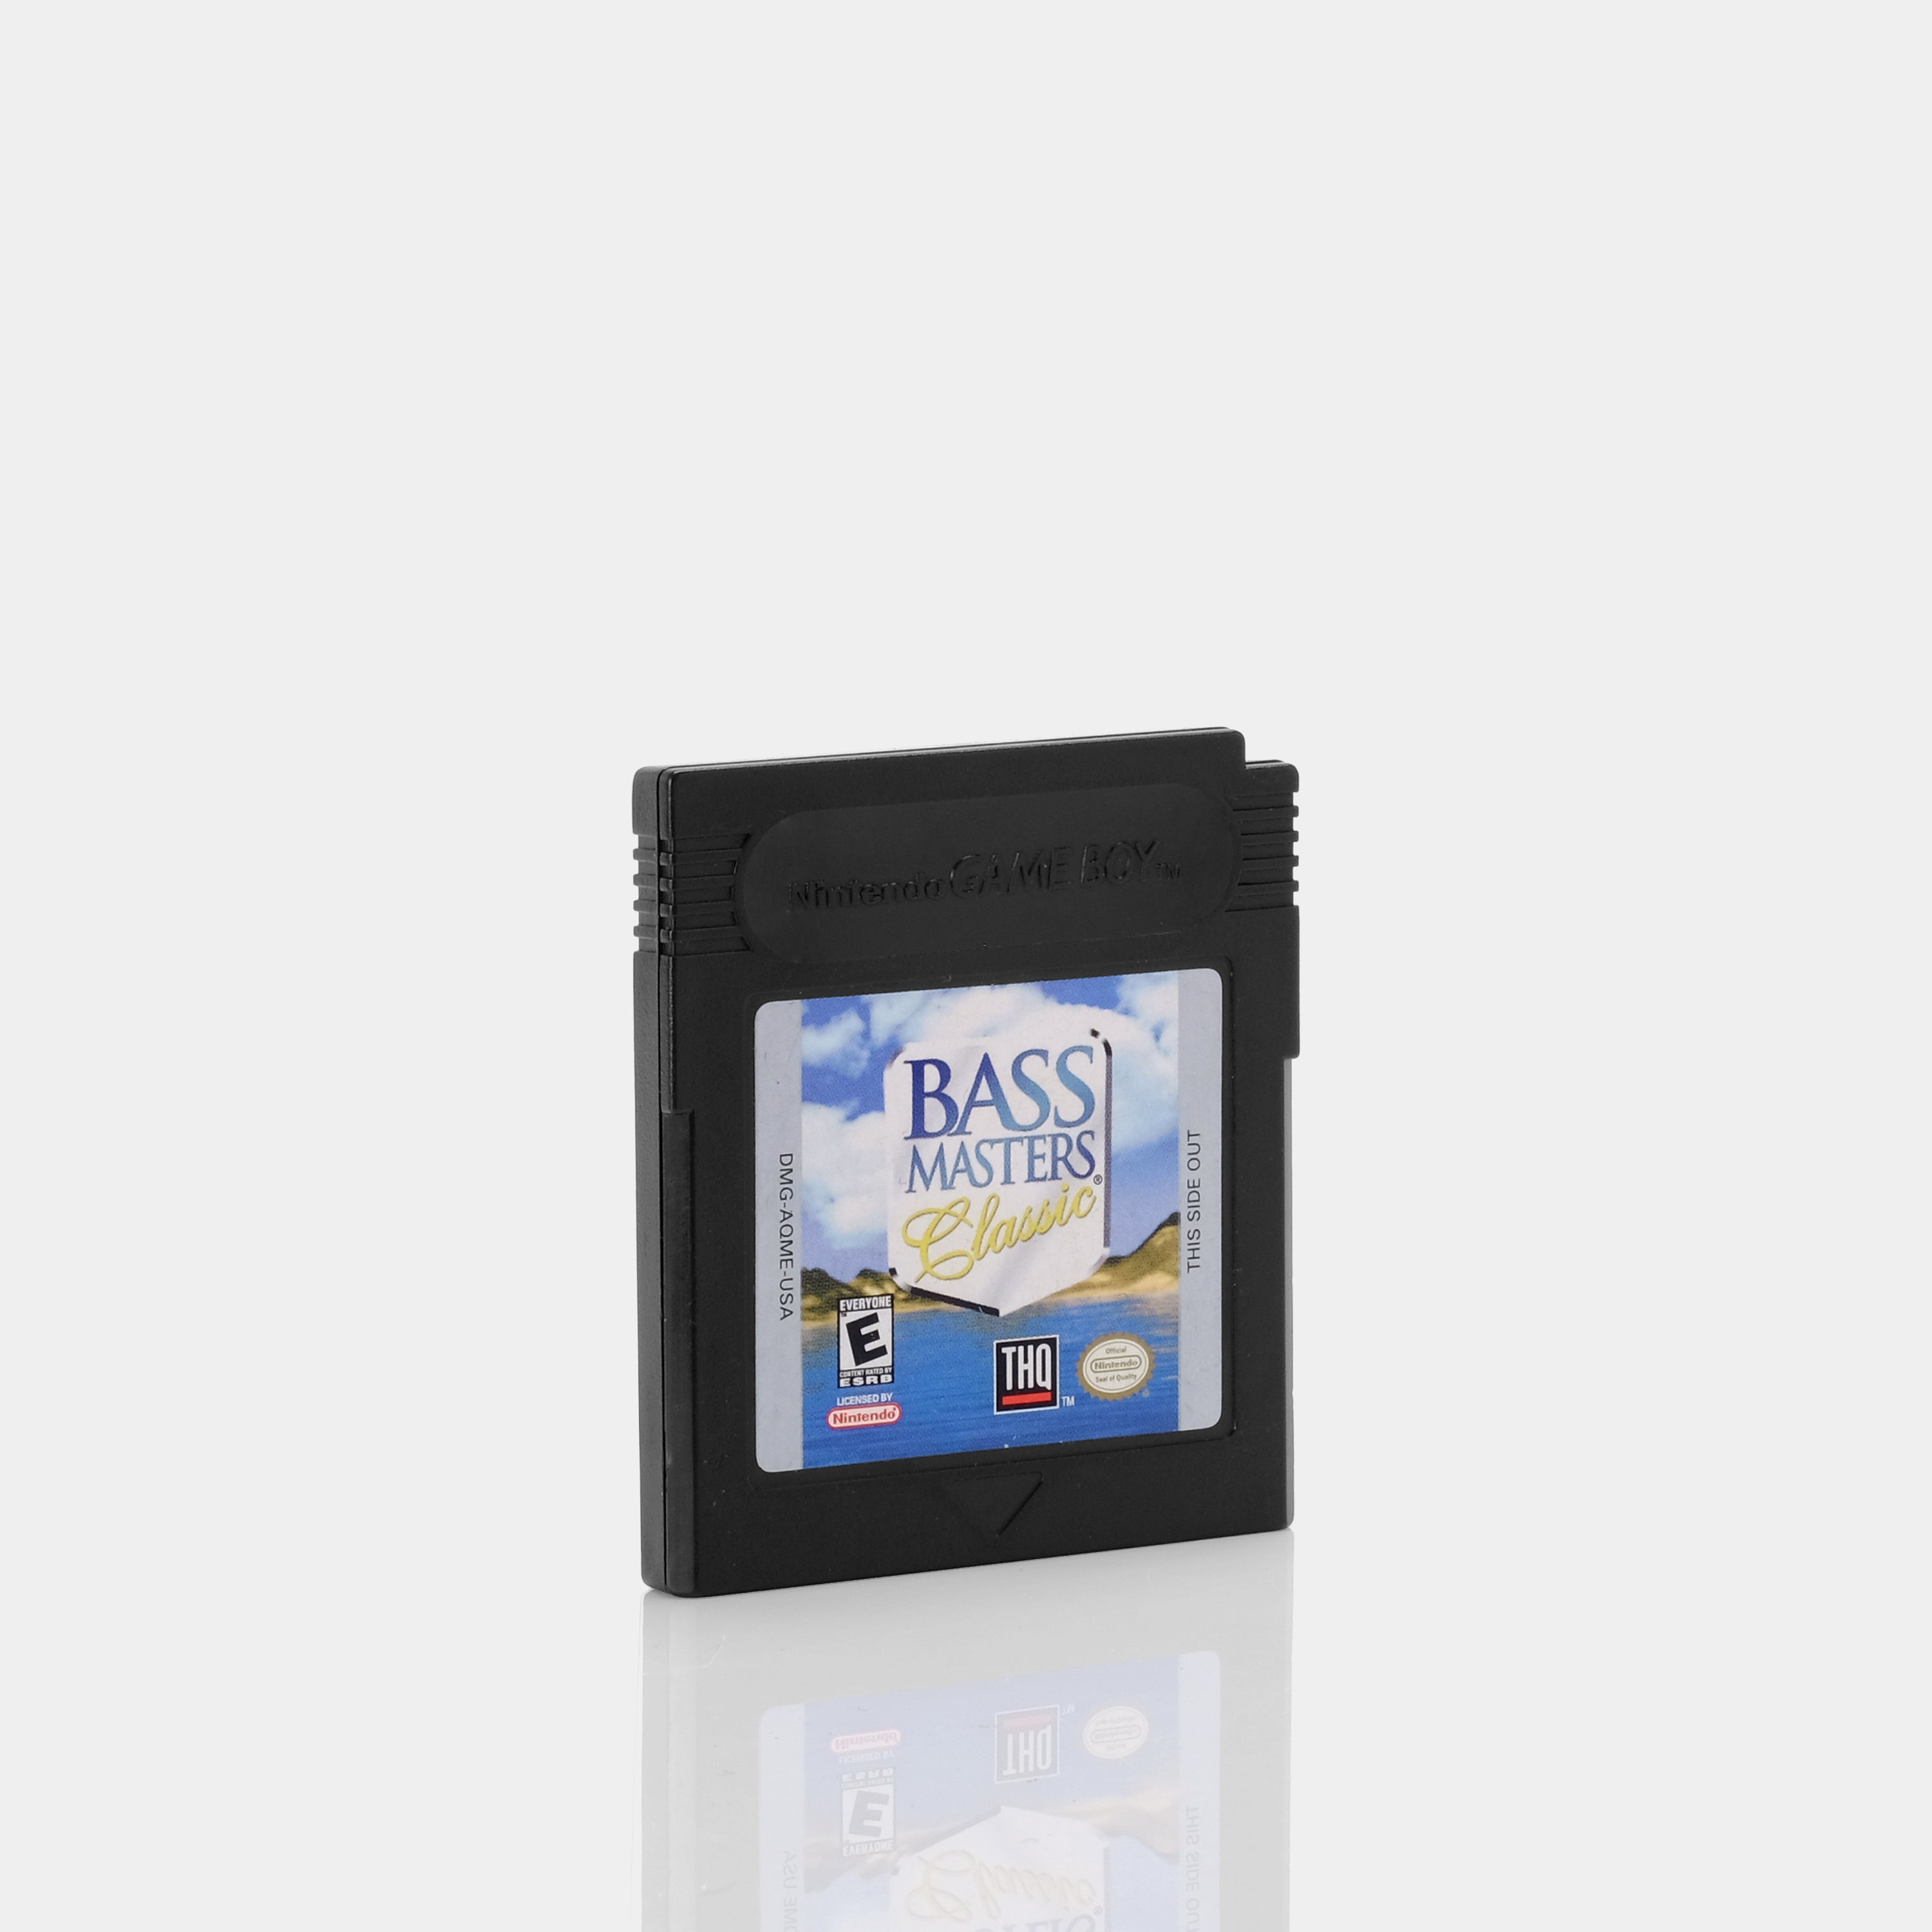 Bass Masters Classic Game Boy Color Game